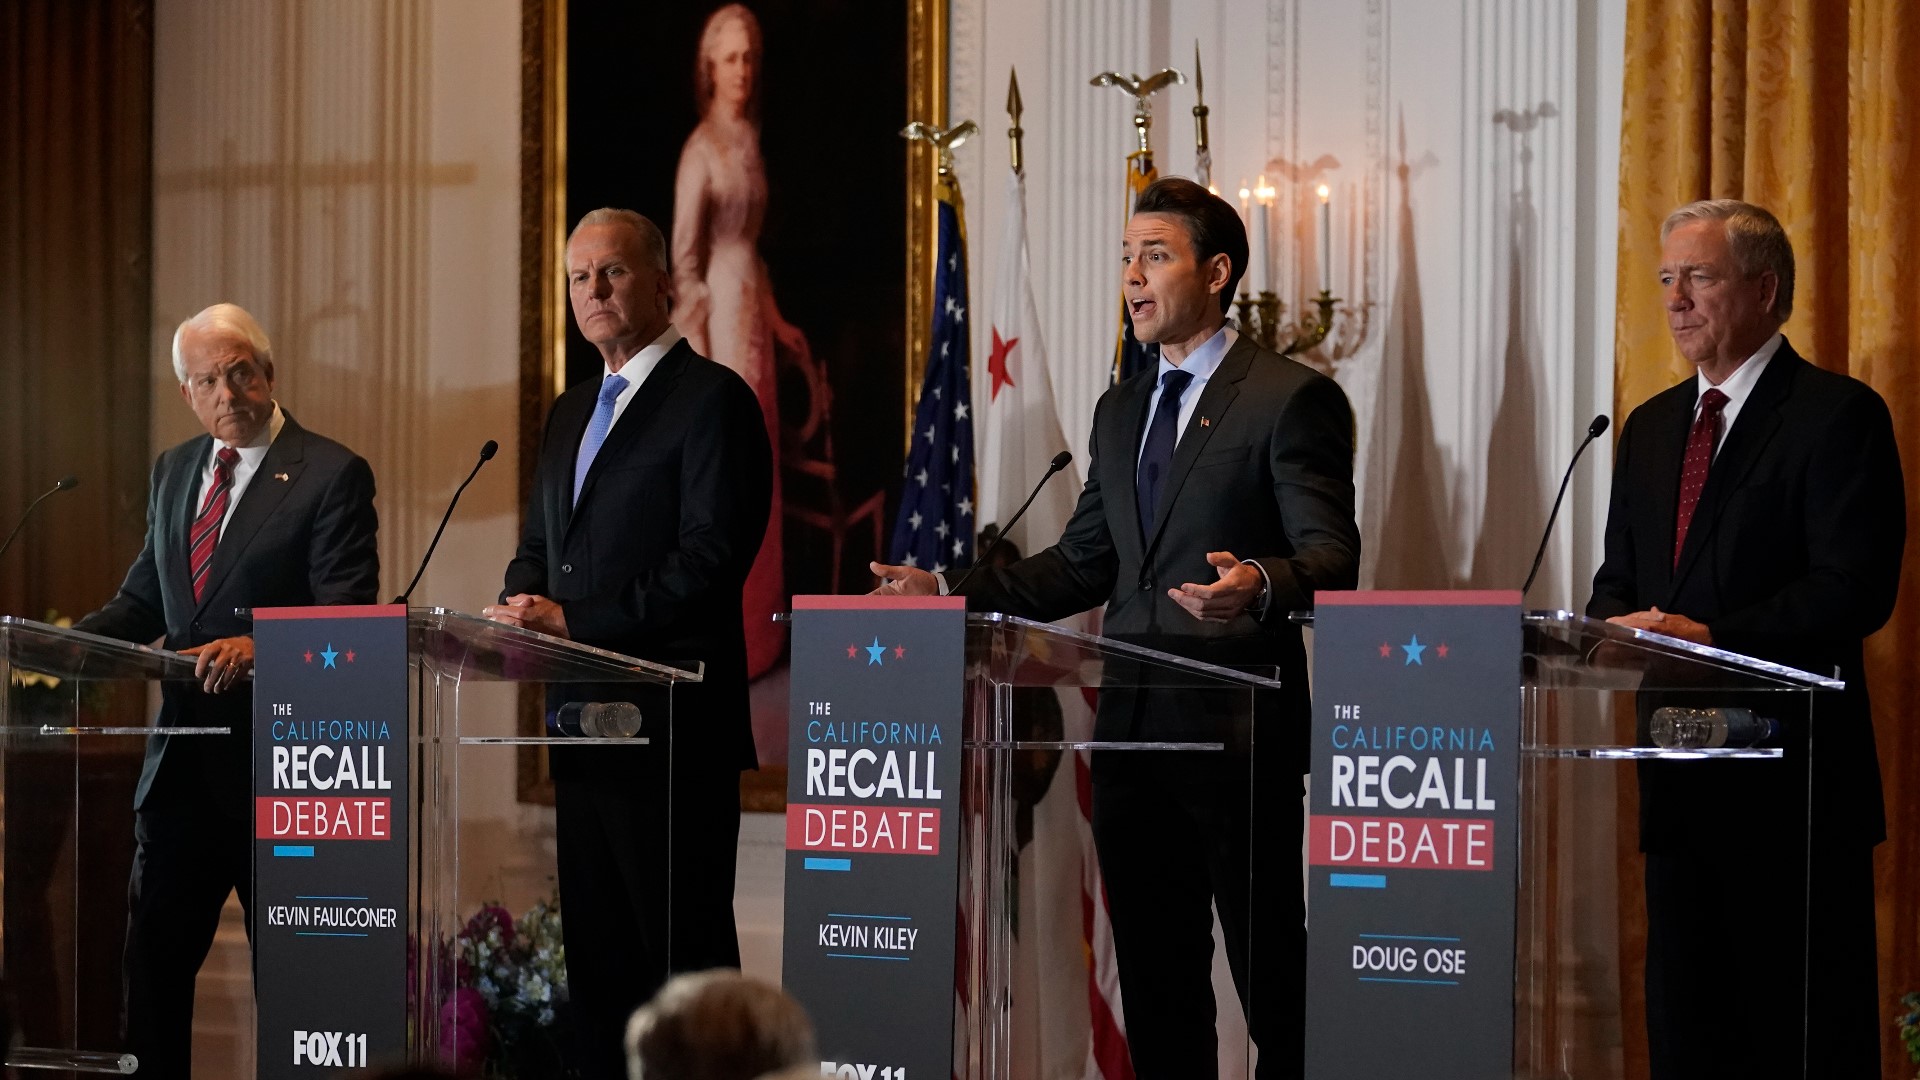 The televised debate at the Richard Nixon Presidential Library in Orange County, California, represented a chance for the candidates to connect with voters statewide